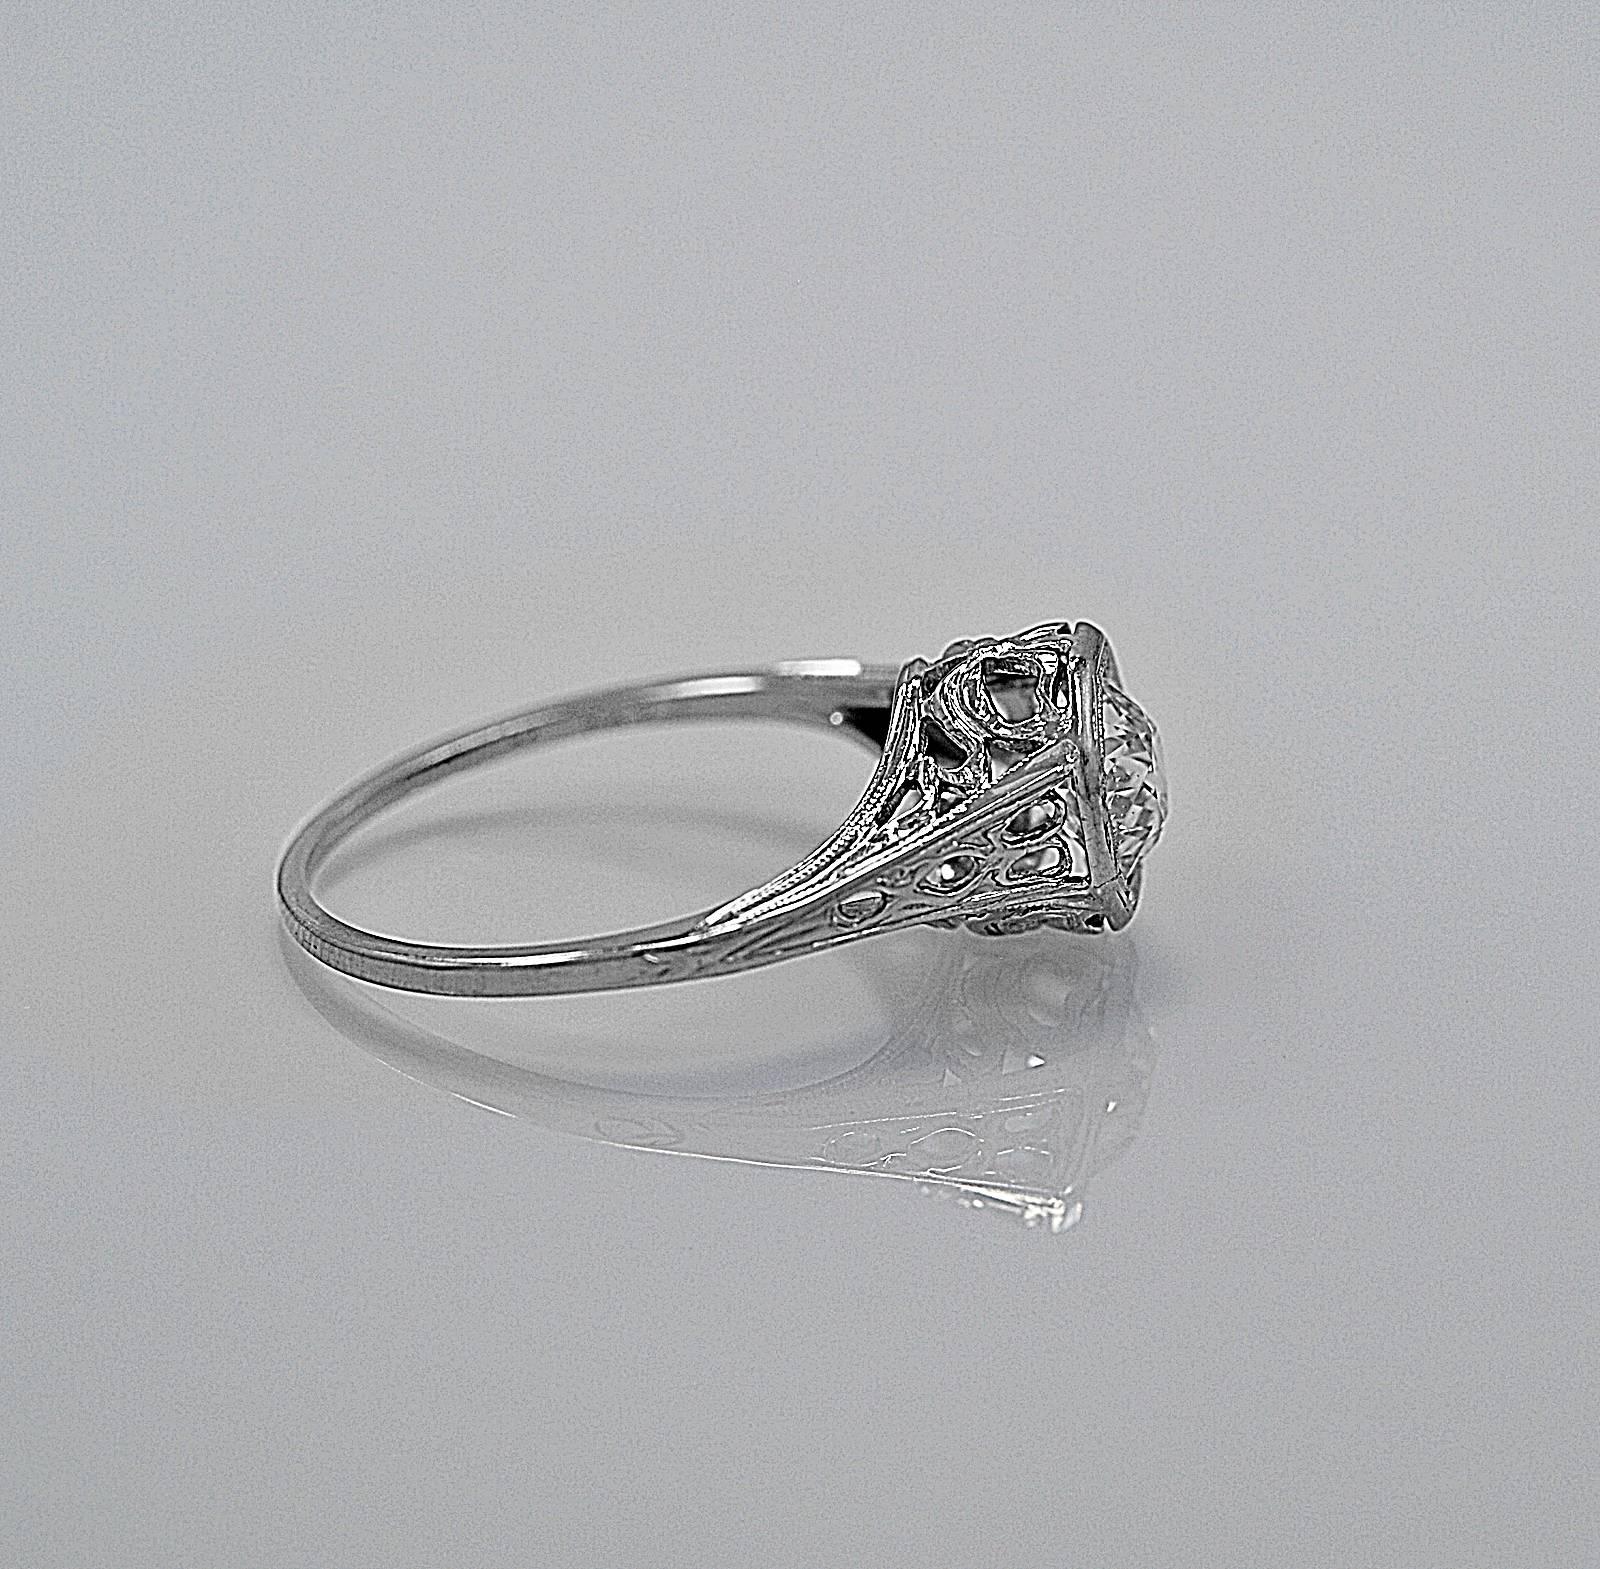 A wonderful vintage engagement ring featuring a .95ct. apx. European cut diamond with SI1 clarity and I-J color. The diamond is set in an octagon shaped setting which showcases this stunning round diamond. This lovely diamond vintage engagement ring